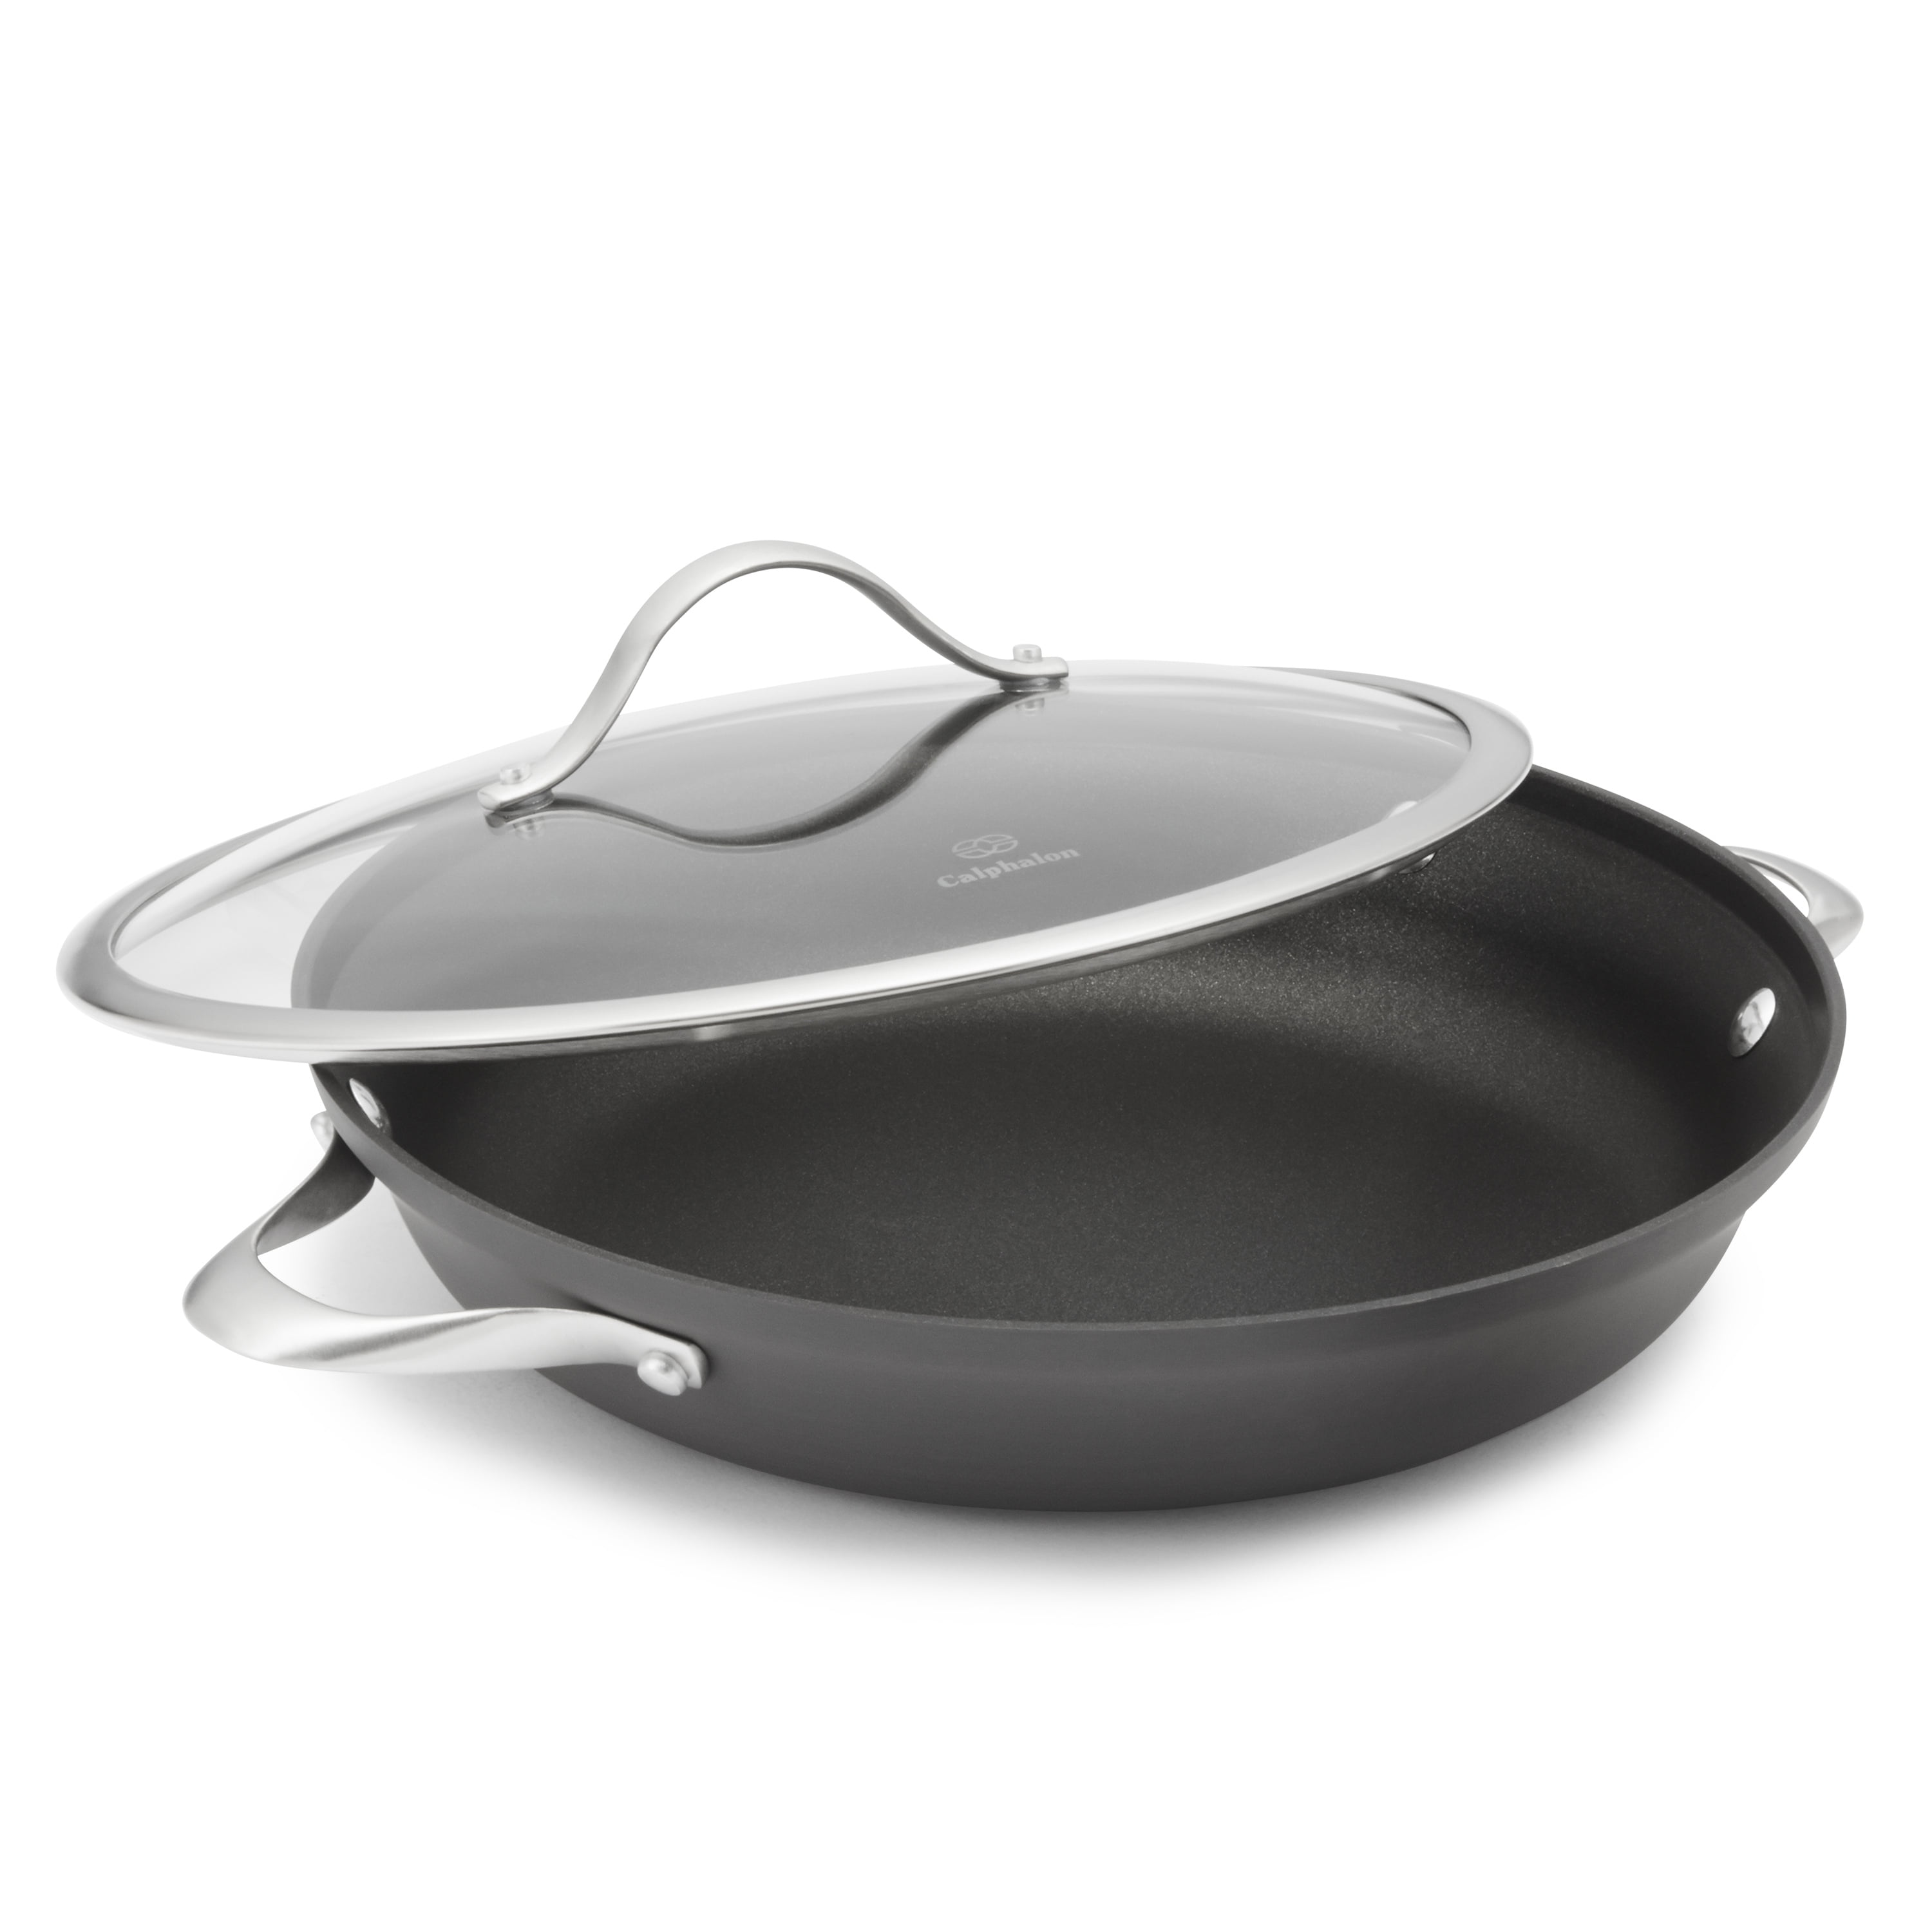 Calphalon Tri-Ply Stainless Steel 12-in. Covered Everyday Pan